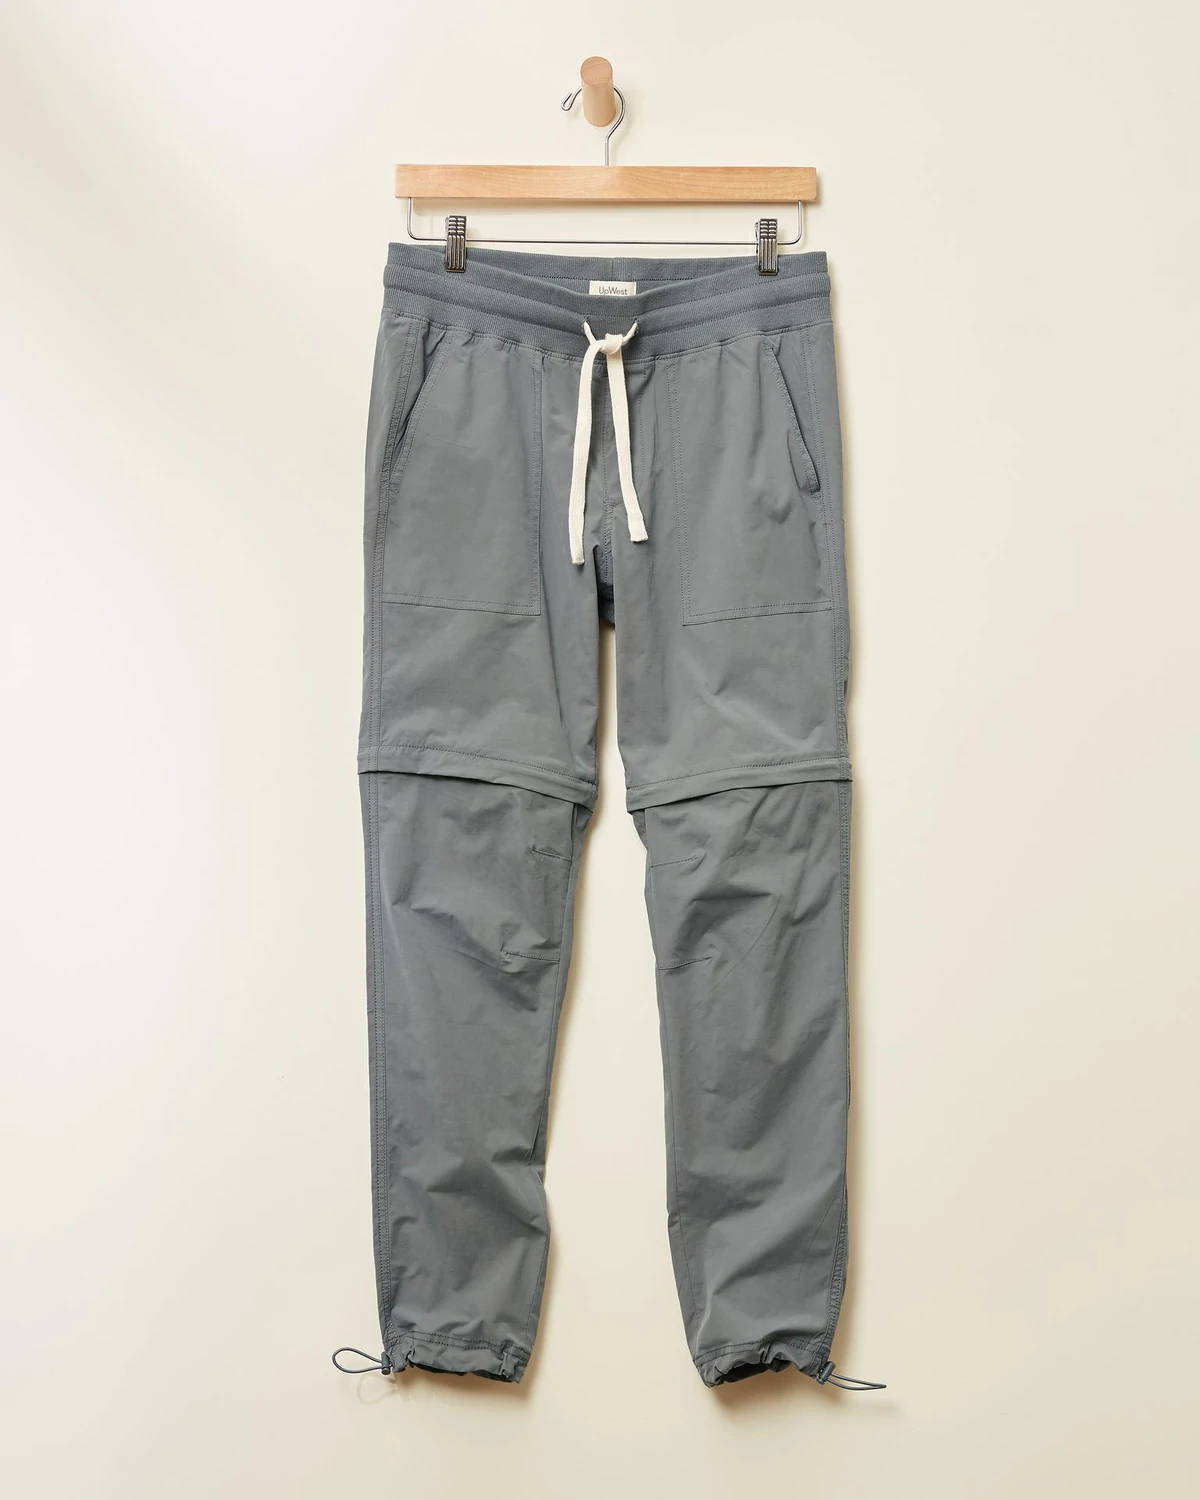 A comfortable, pull-on pant that converts into a short will be a perfect gift for any dad.